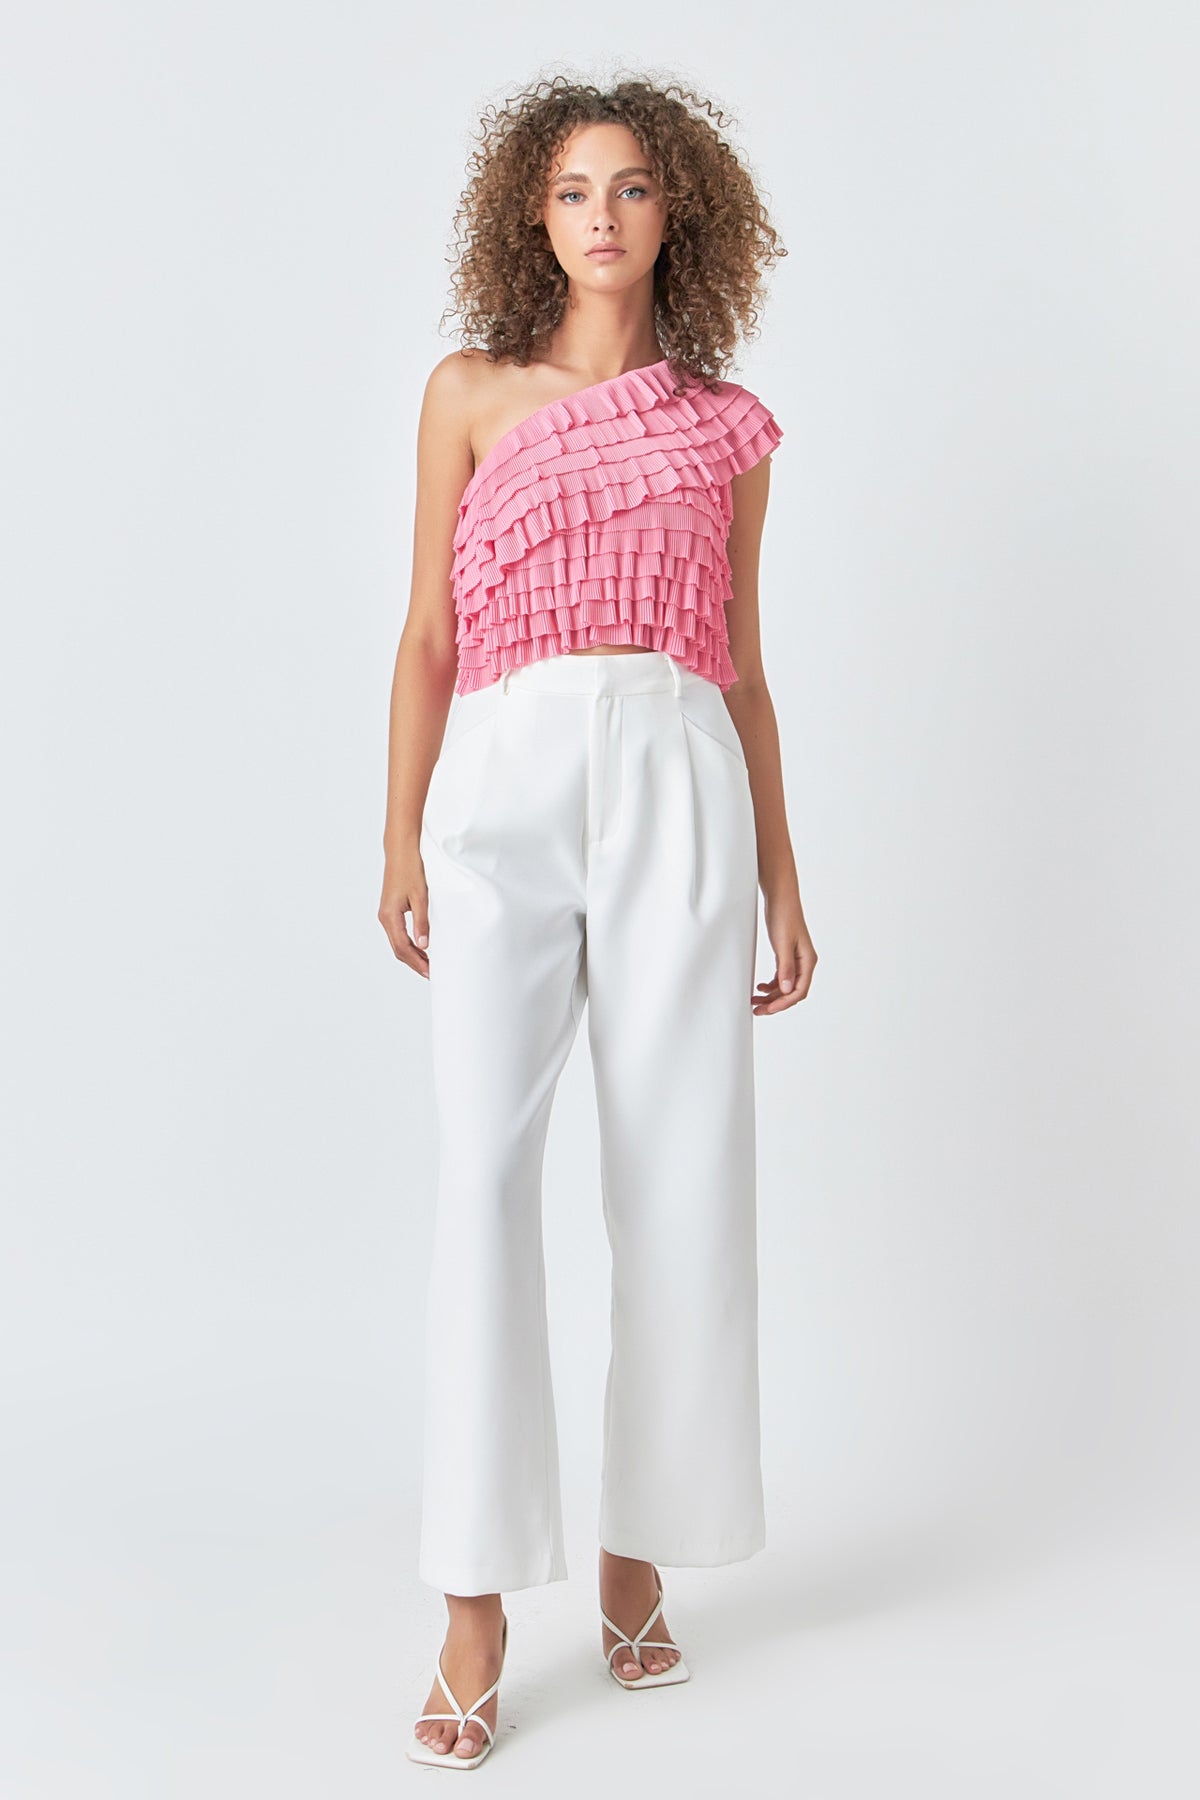 ENDLESS ROSE - Ruffled One-shoulder Top - TOPS available at Objectrare